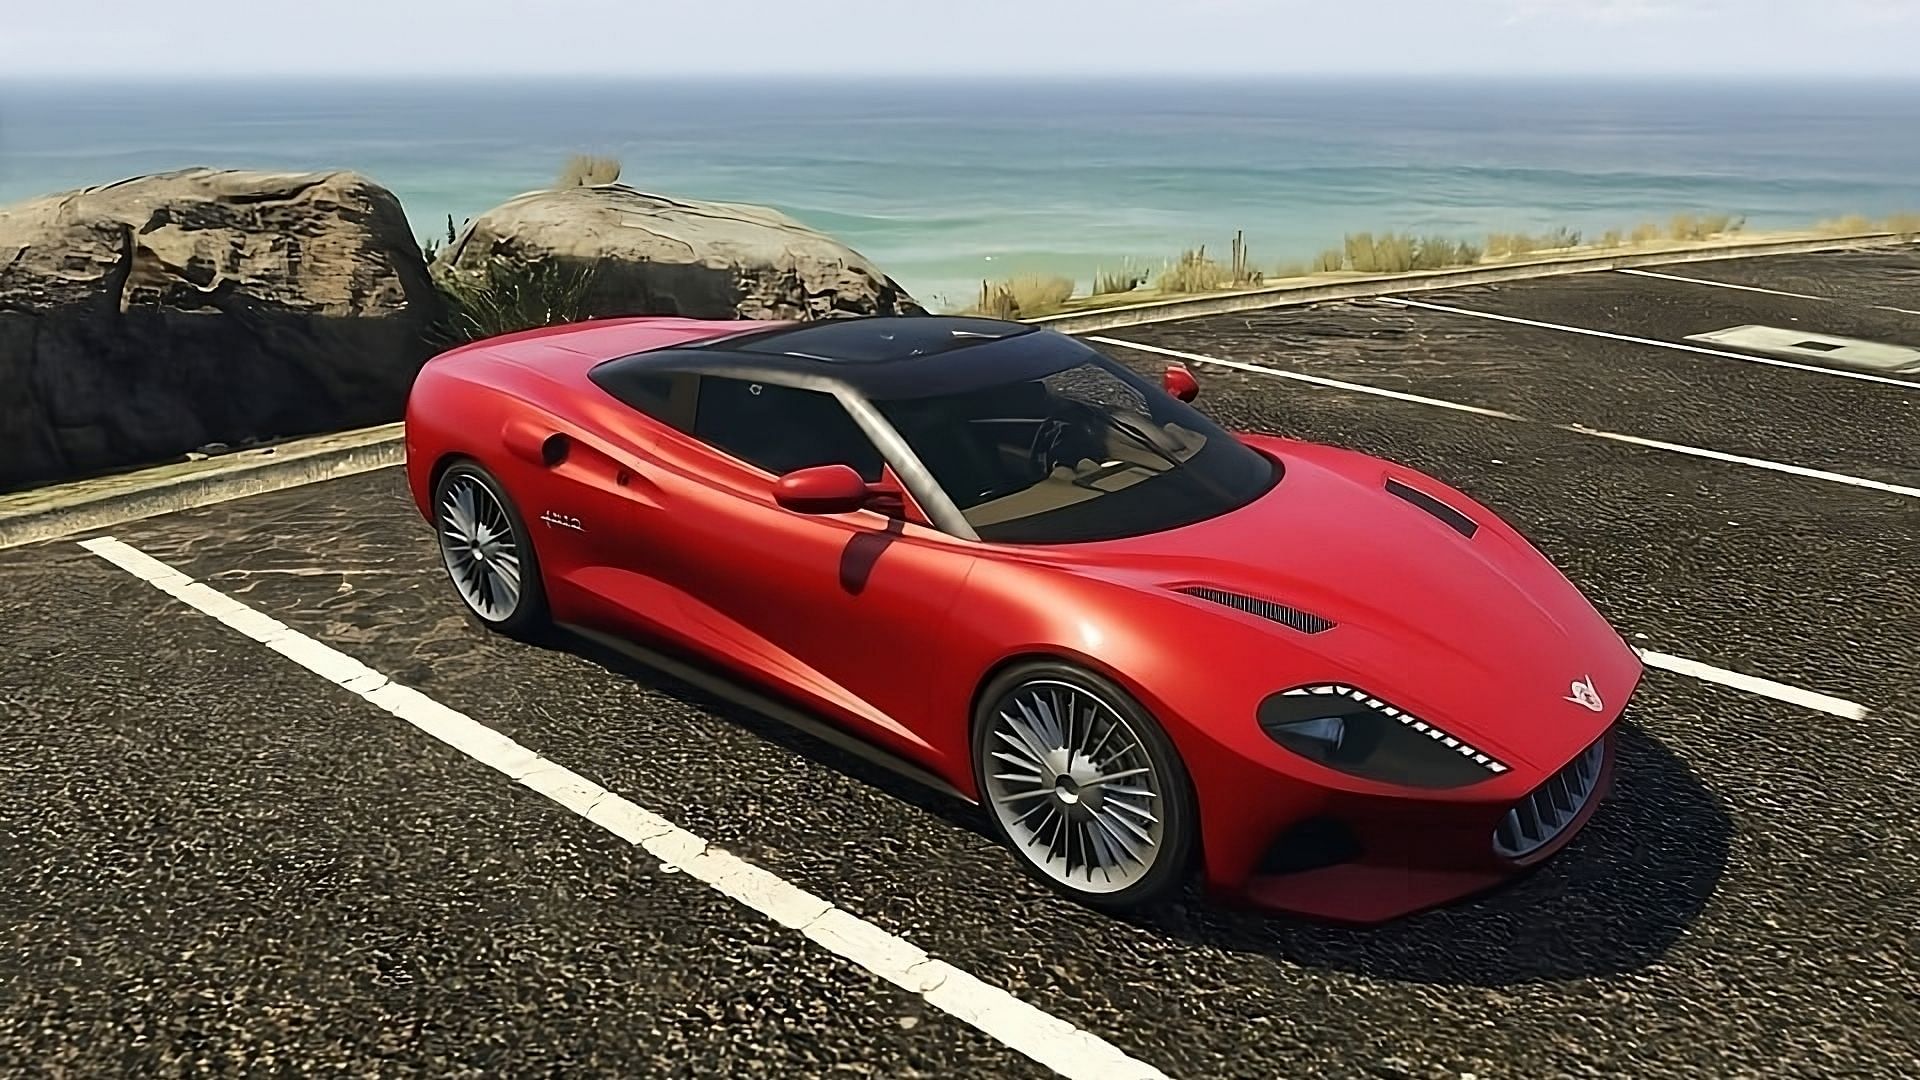 This car also has a nice appearance (Image via Rockstar Games)